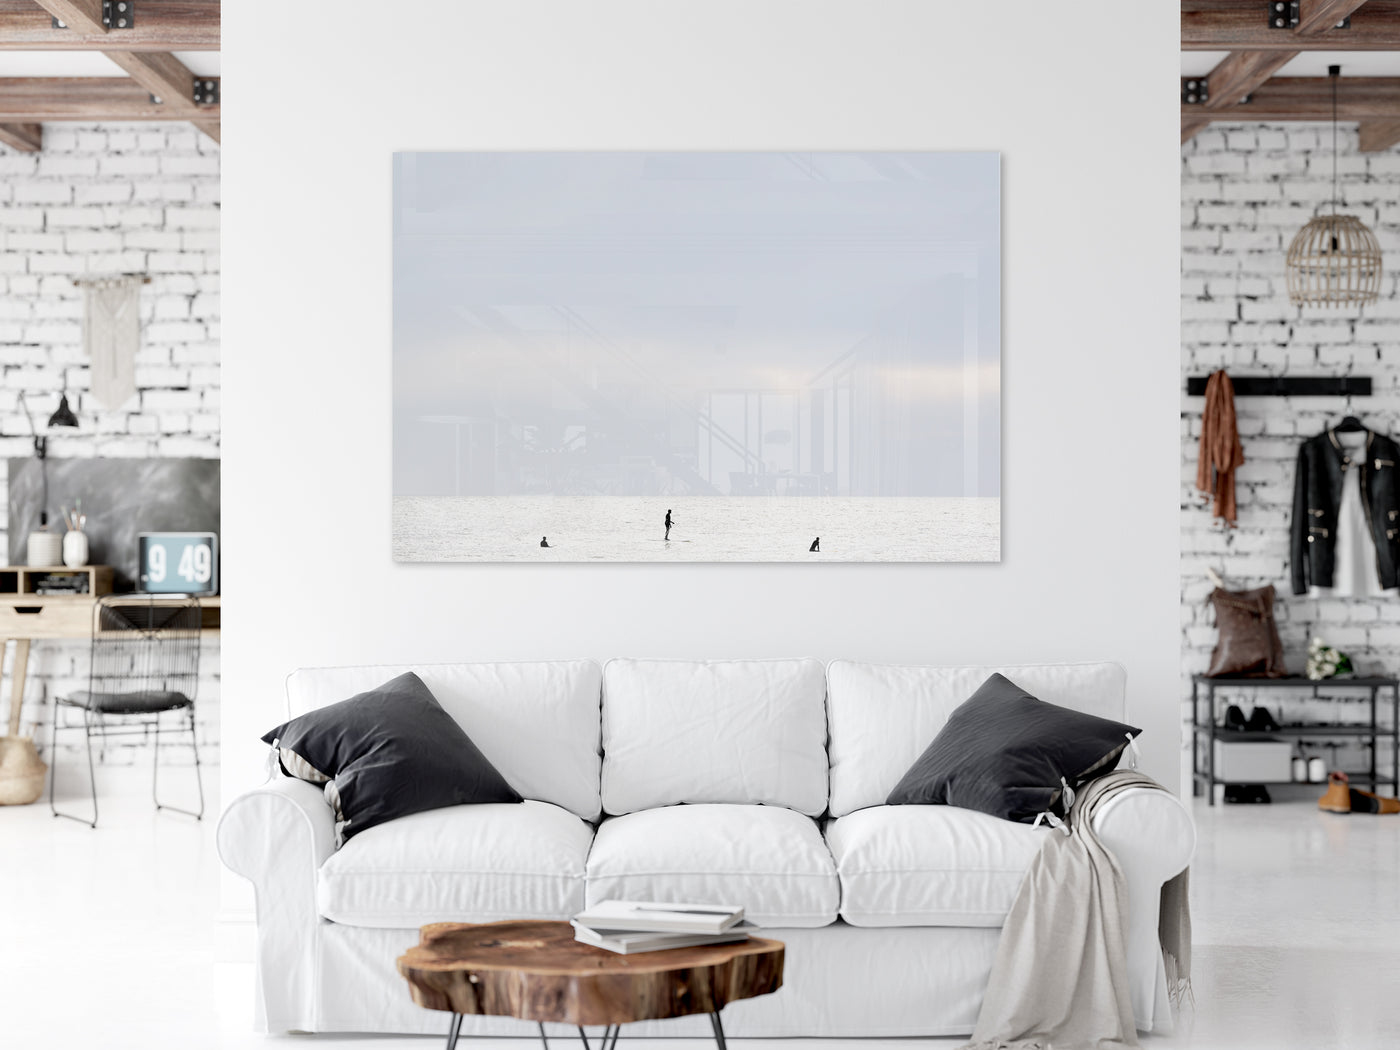 Surfing No 3 - Acrylic glass print by Cattie Coyle Photography above couch